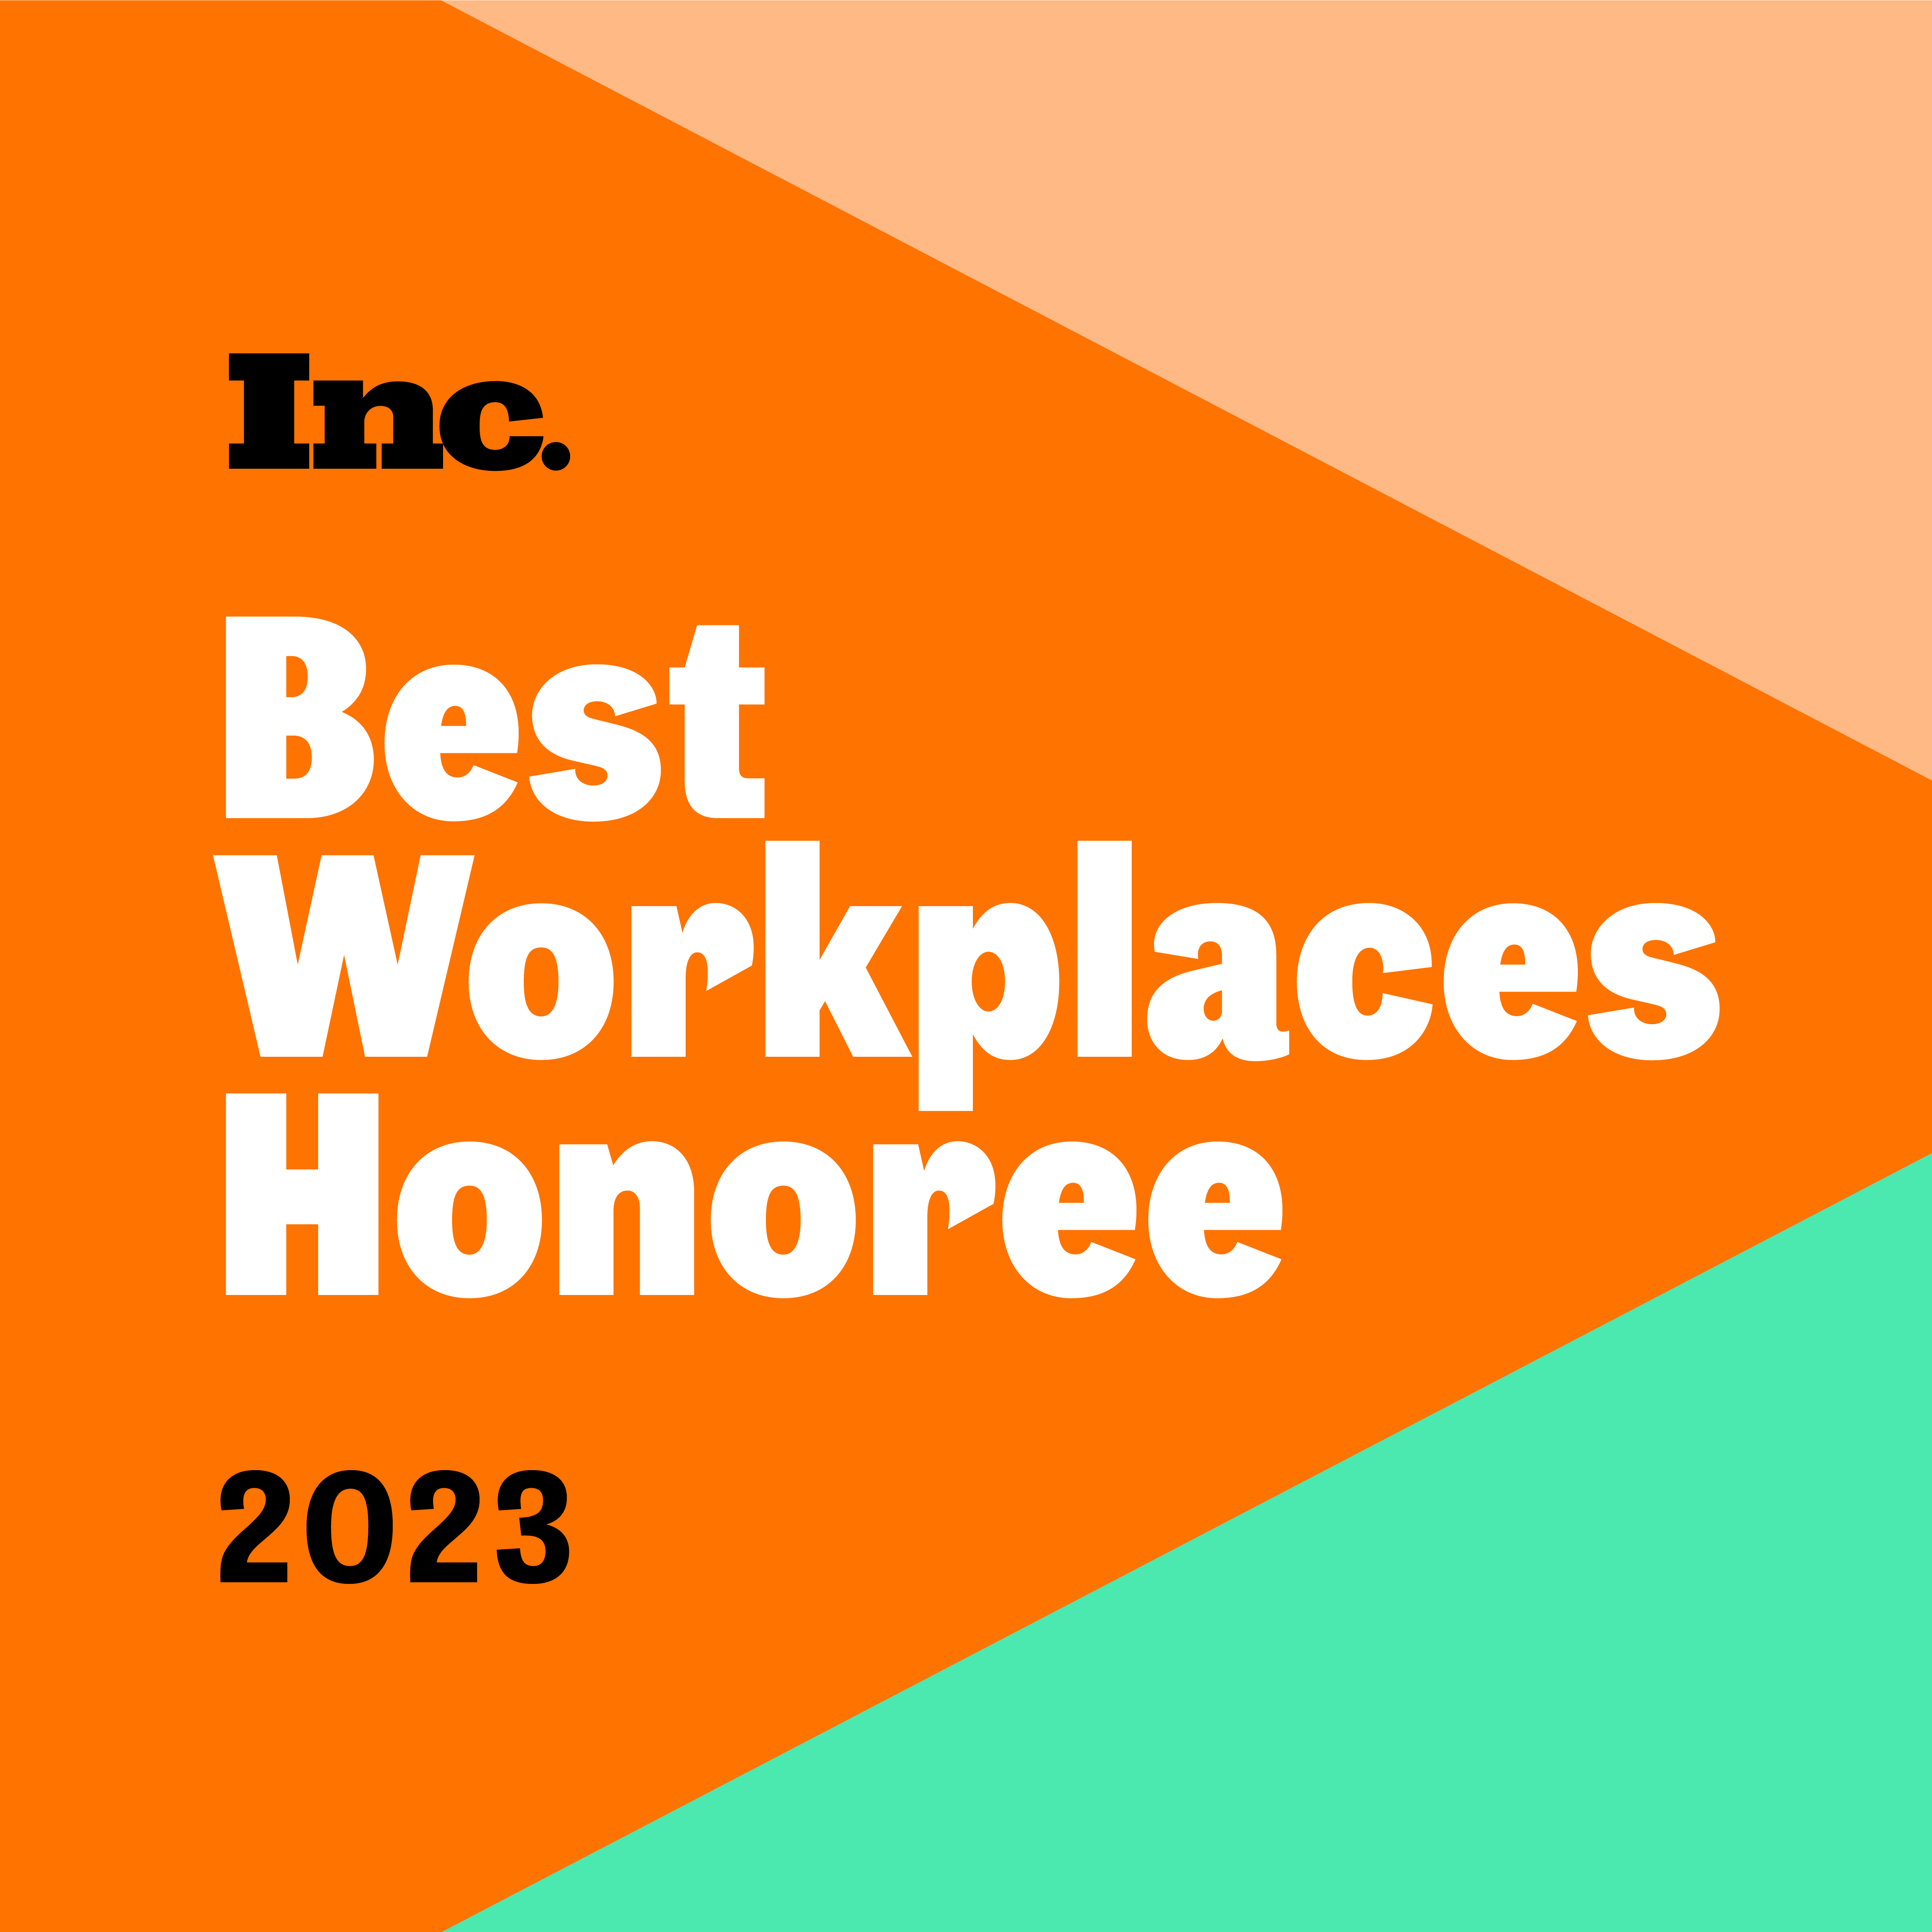 Omnistruct is a 2023 Inc.'s Best Workplace Honoree.